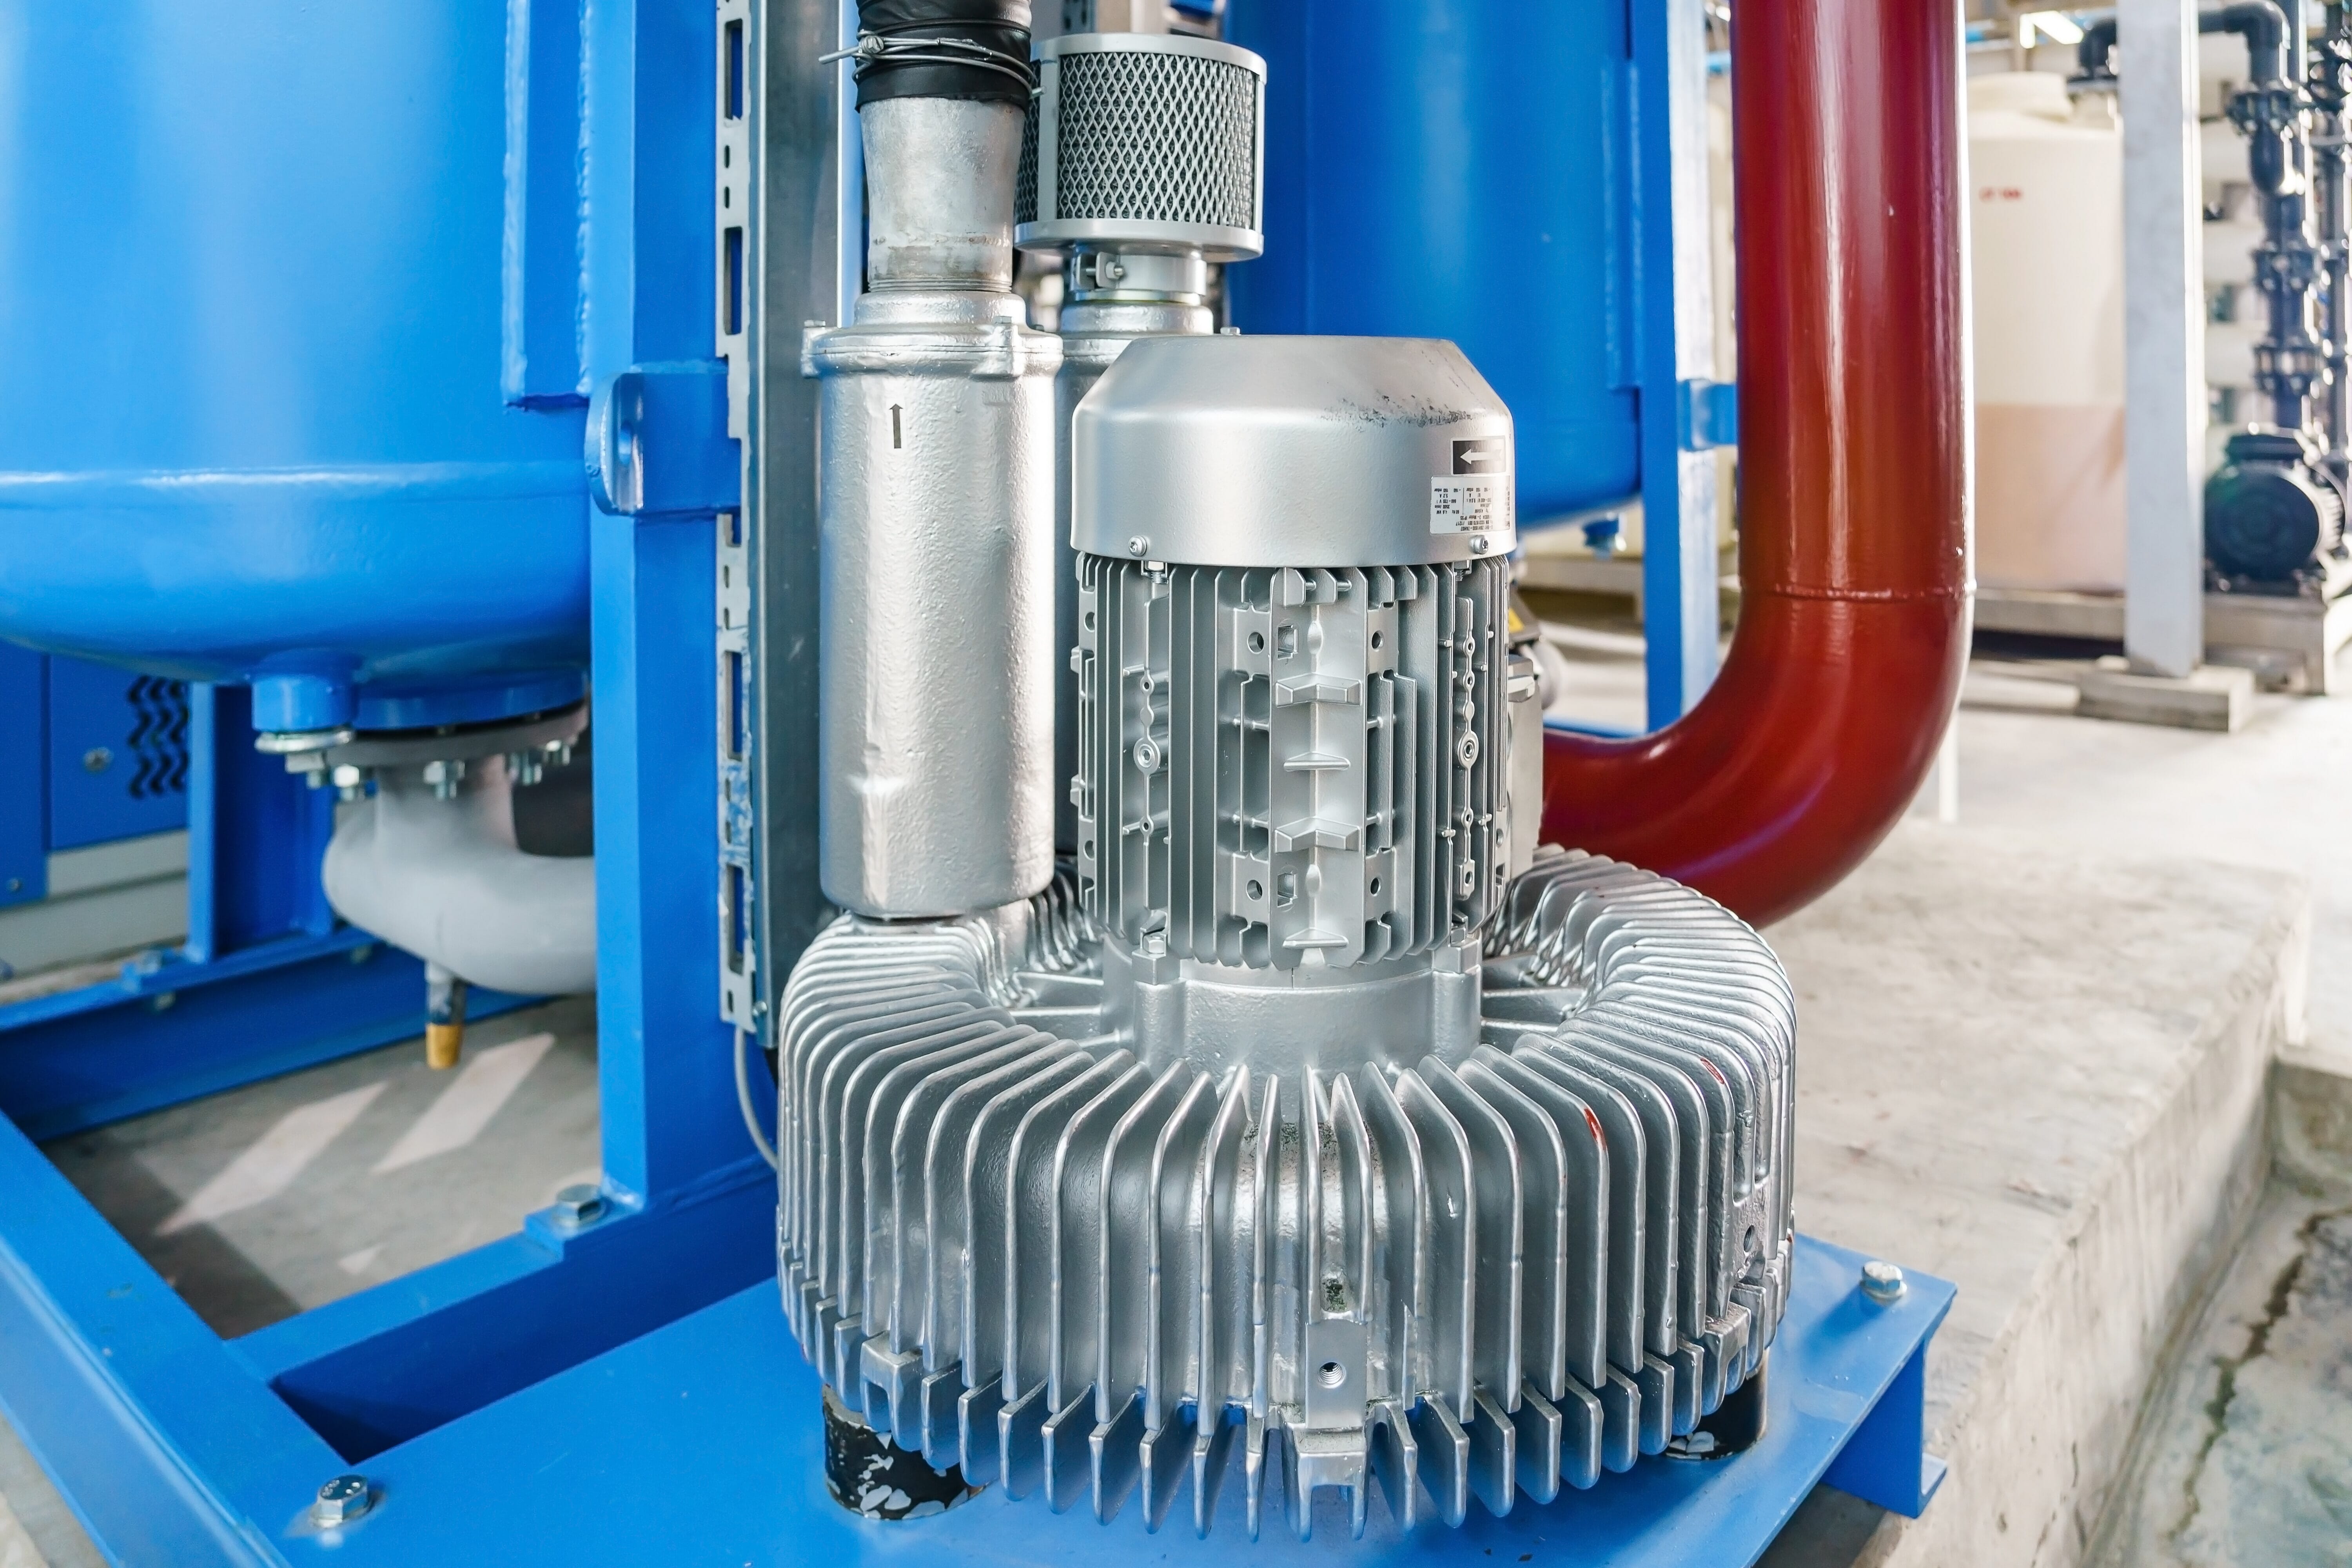 17 Essential Tips to Keep Your Rotary Screw Compressor Running in the Summer Heat